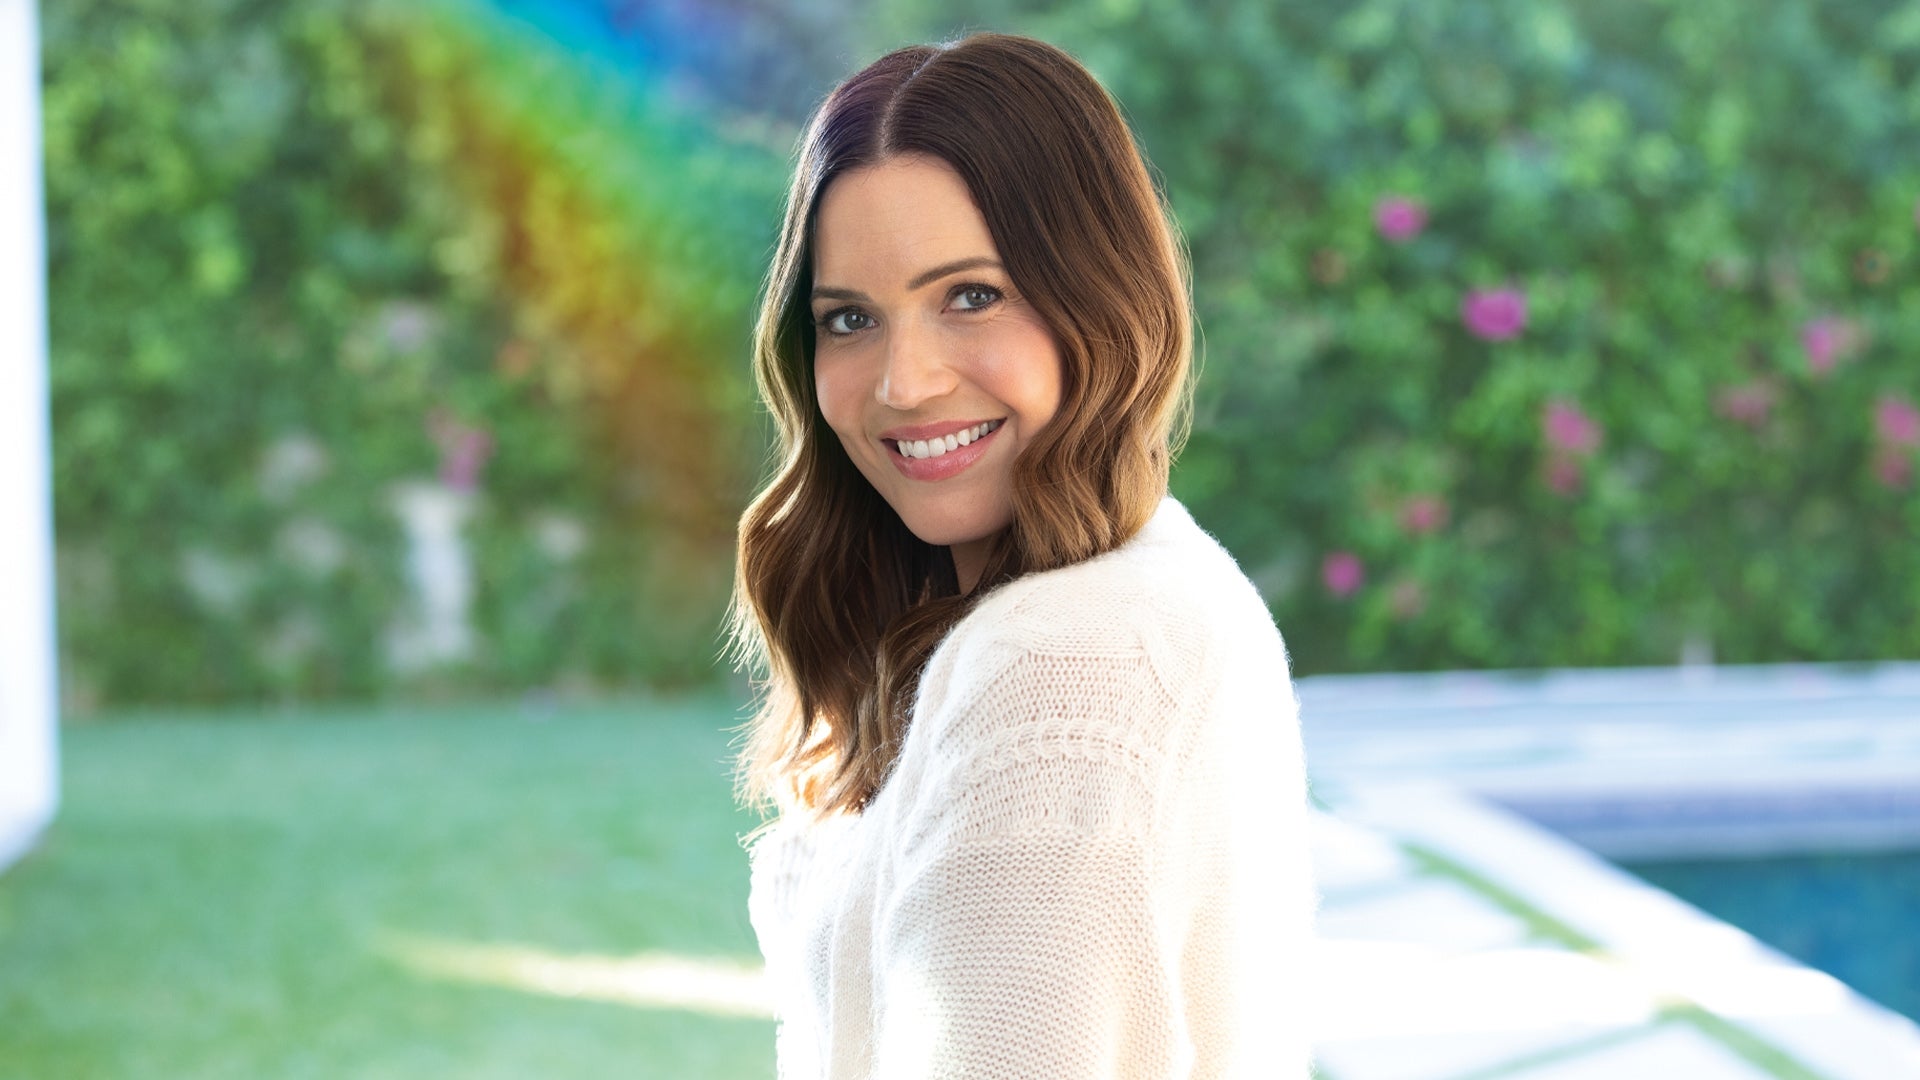 Mandy Moore on Canceling Music Tour and Teaming Up With Lumenis to Educate People on Dry Eye Disease